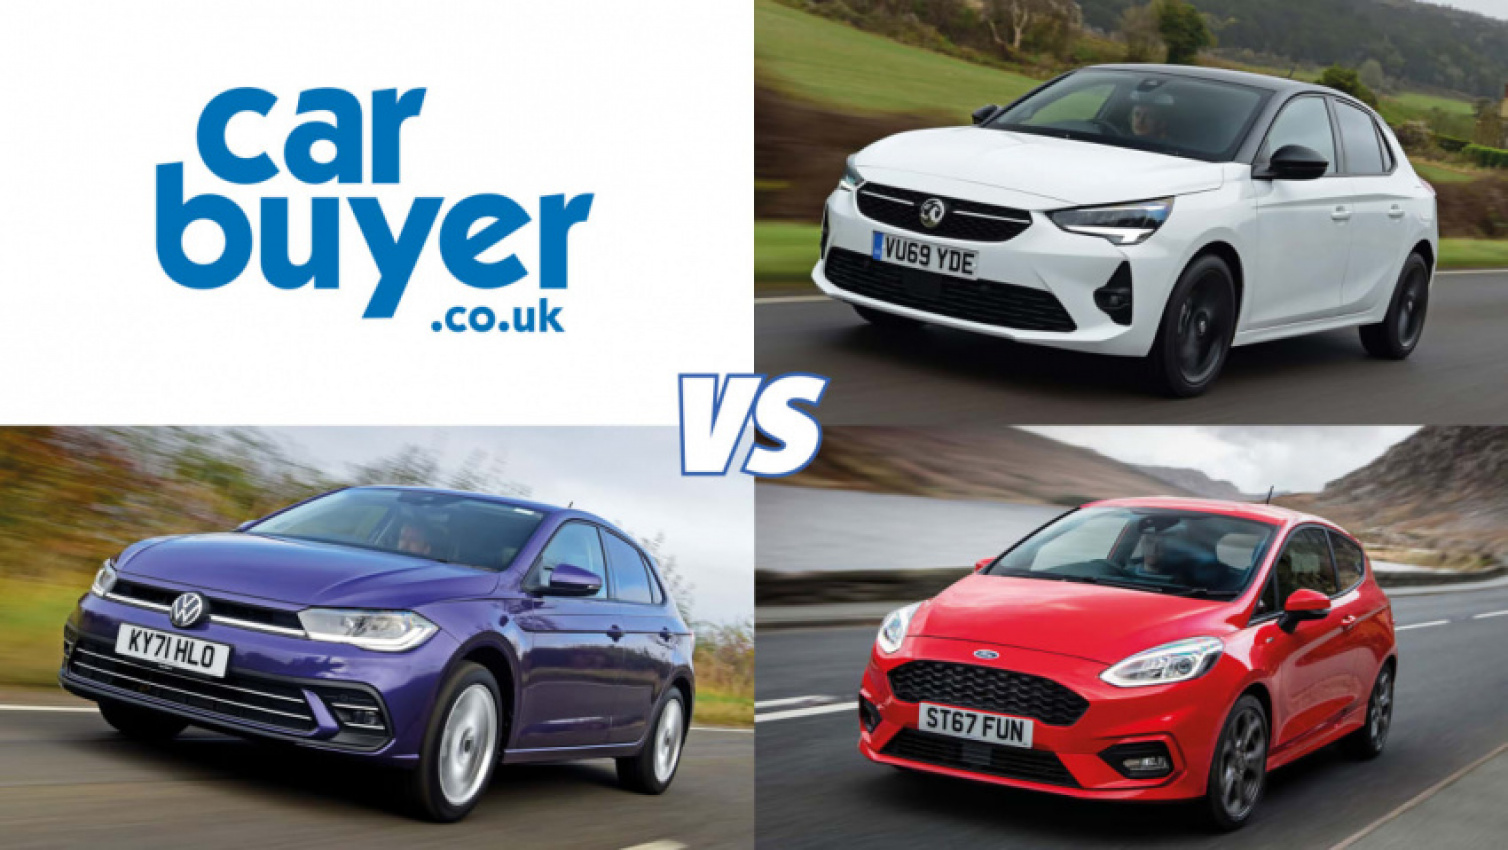 android, autos, cars, ford, reviews, volkswagen, compare cars, corsa-e hatchback, fiesta hatchback, fiesta st hatchback, ford fiesta, polo hatchback, superminis, volkswagen polo, android, volkswagen polo vs ford fiesta vs vauxhall corsa: which should you buy?